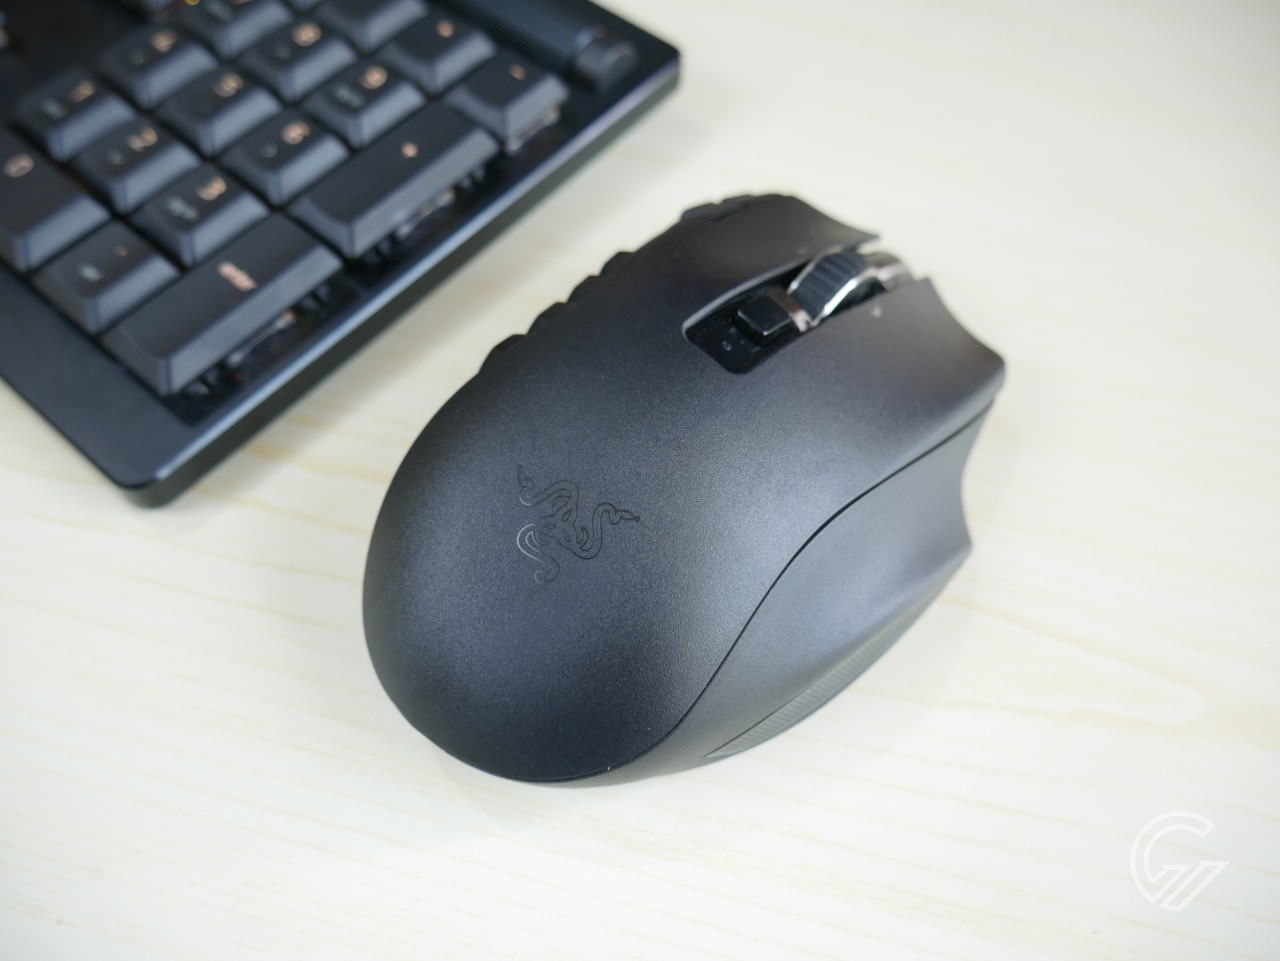 Review Mouse Razer Naga V2 Hyperspeed, Cocok Buat Main Game Online